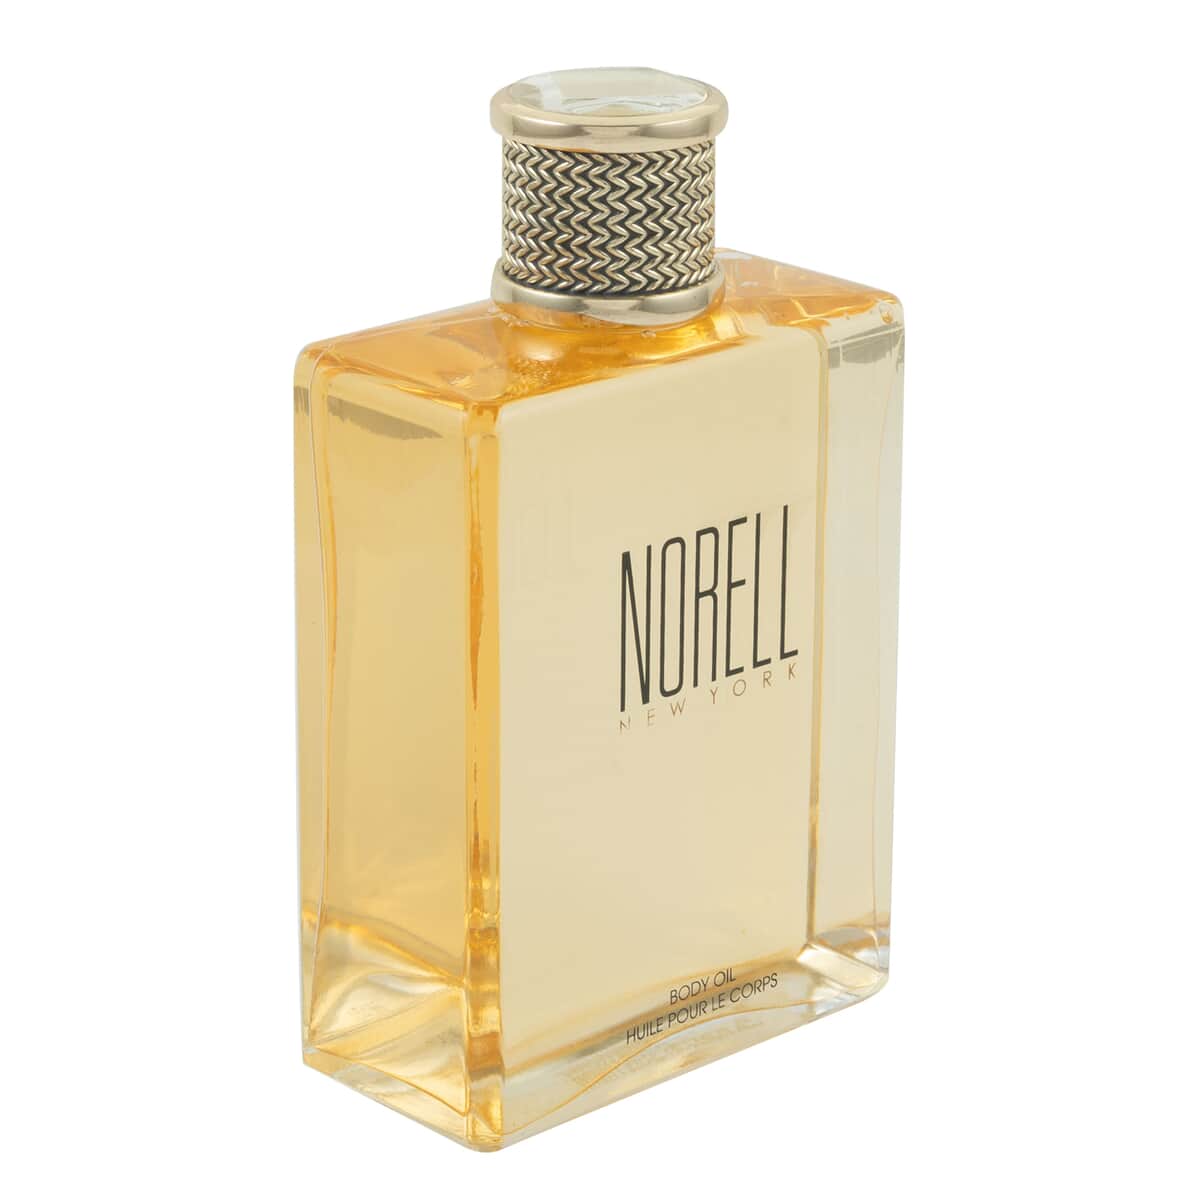 NORELL New York Body Oil With Long Lasting Fragrance (8oz) image number 4